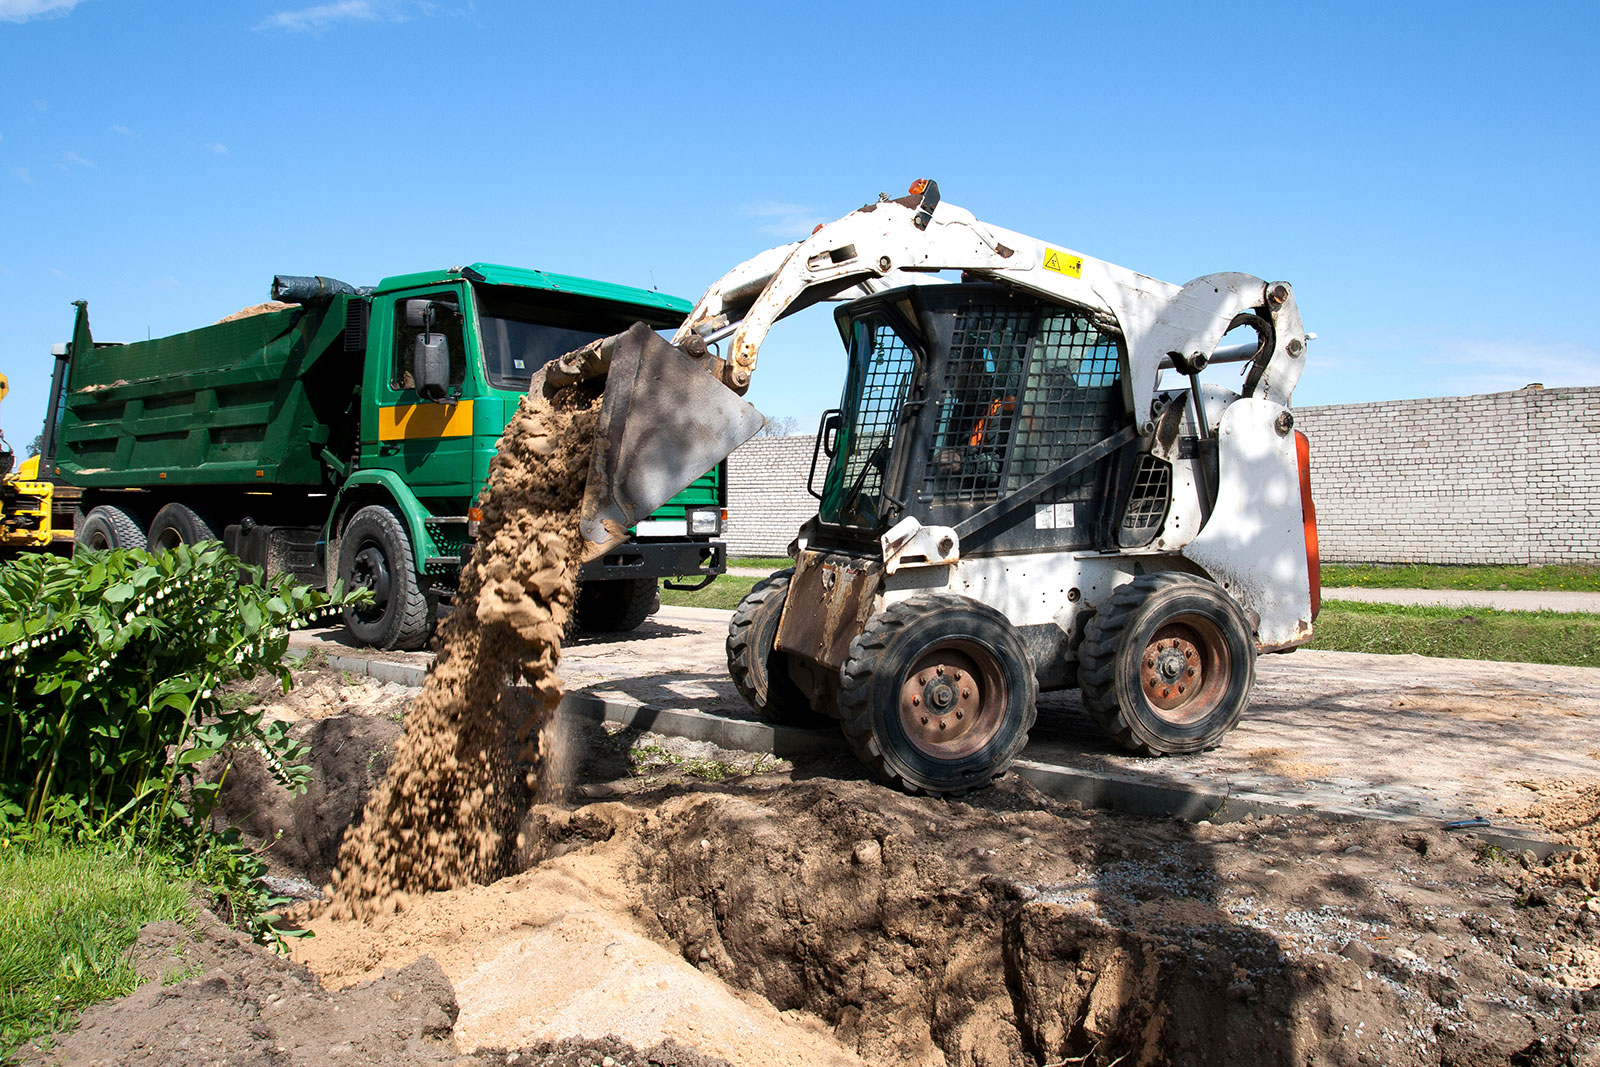 The Top Skid Steer Brands: What Works Best with Your Attachments